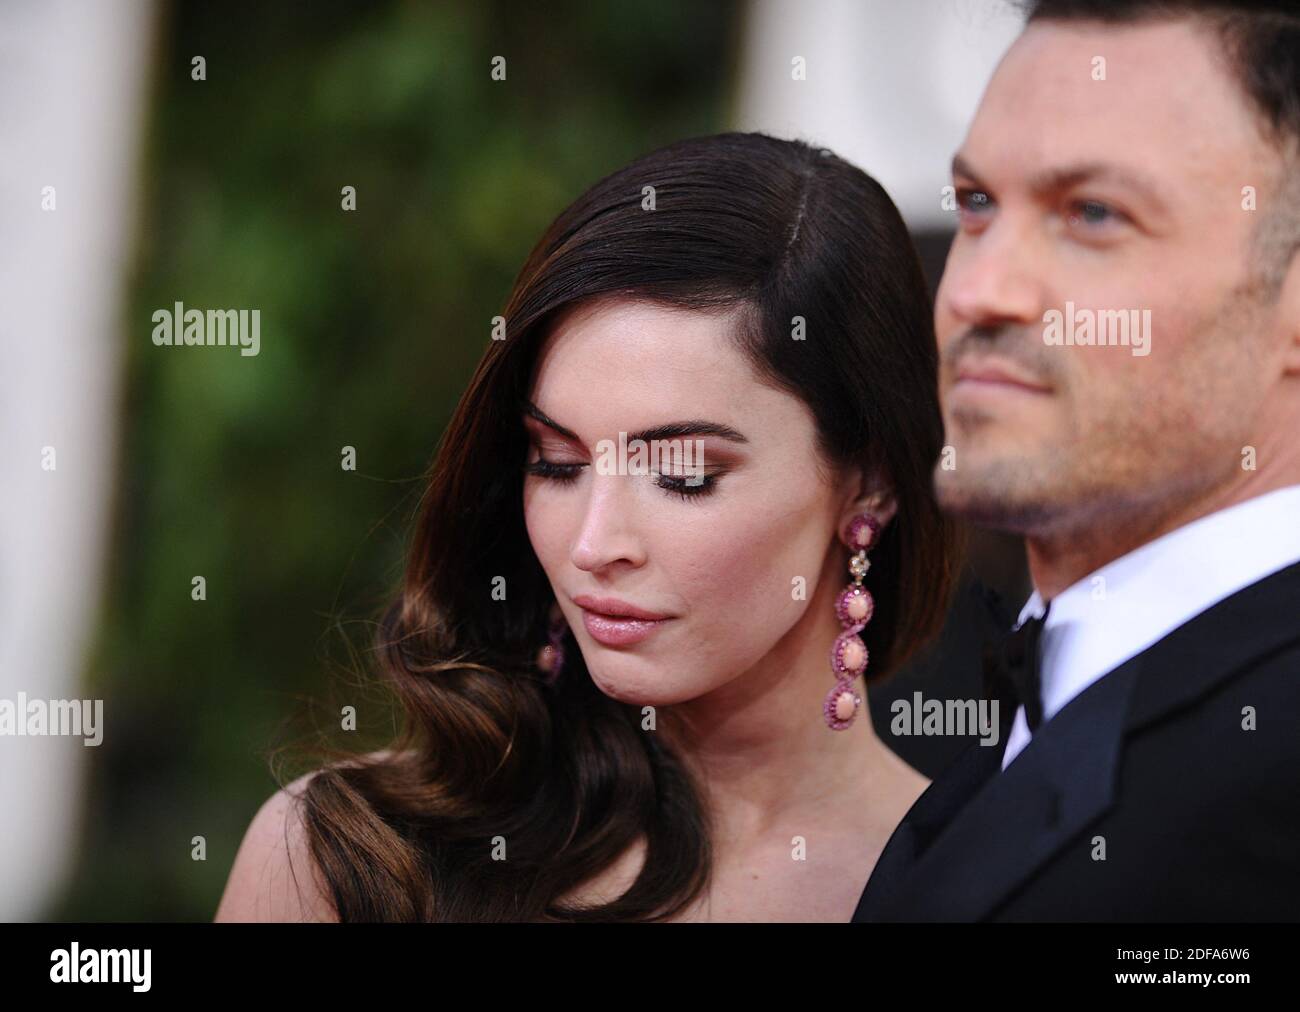 File phot dated January 13, 2013 of Megan Fox and Brian Austin Green arriving for the 70th Annual Golden Globe Awards Ceremony, held at the Beverly Hilton Hotel in Los Angeles, CA, USA. After nearly 10 years of marriage and three children together, Megan Fox and Brian Austin Green have split. The 'Beverly Hills, 90210' star confirmed the news on his podcast “…With Brian Austin Green,' in an episode titled “Context.” Photo by Lionel Hahn/ABACAPRESS.COM Stock Photo